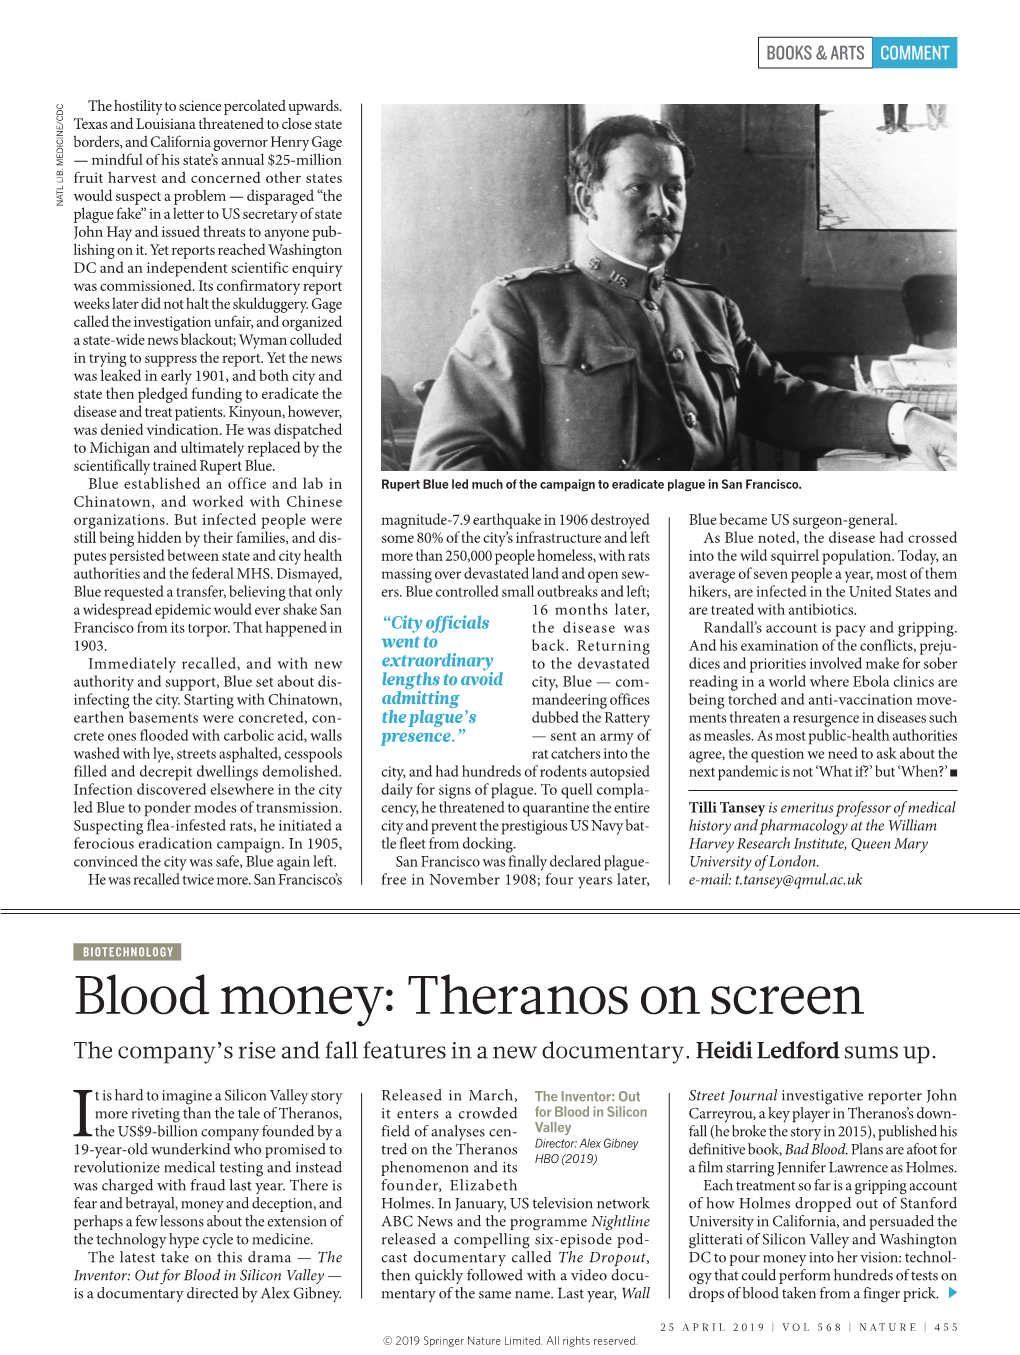 Theranos on Screen the Company’S Rise and Fall Features in a New Documentary